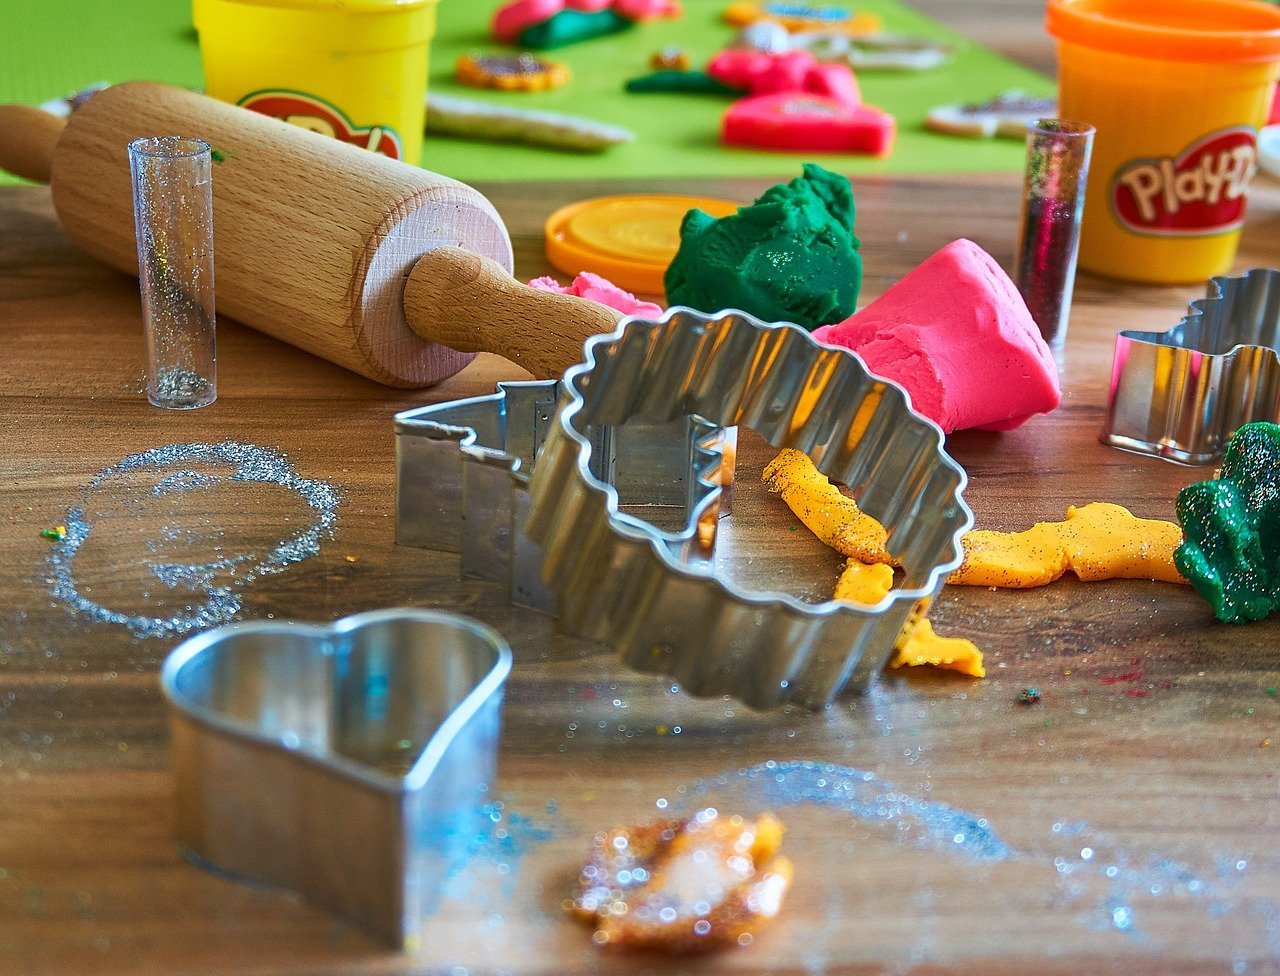 Can You Eat Playdoh? All You Need To Know (2022 Guide)